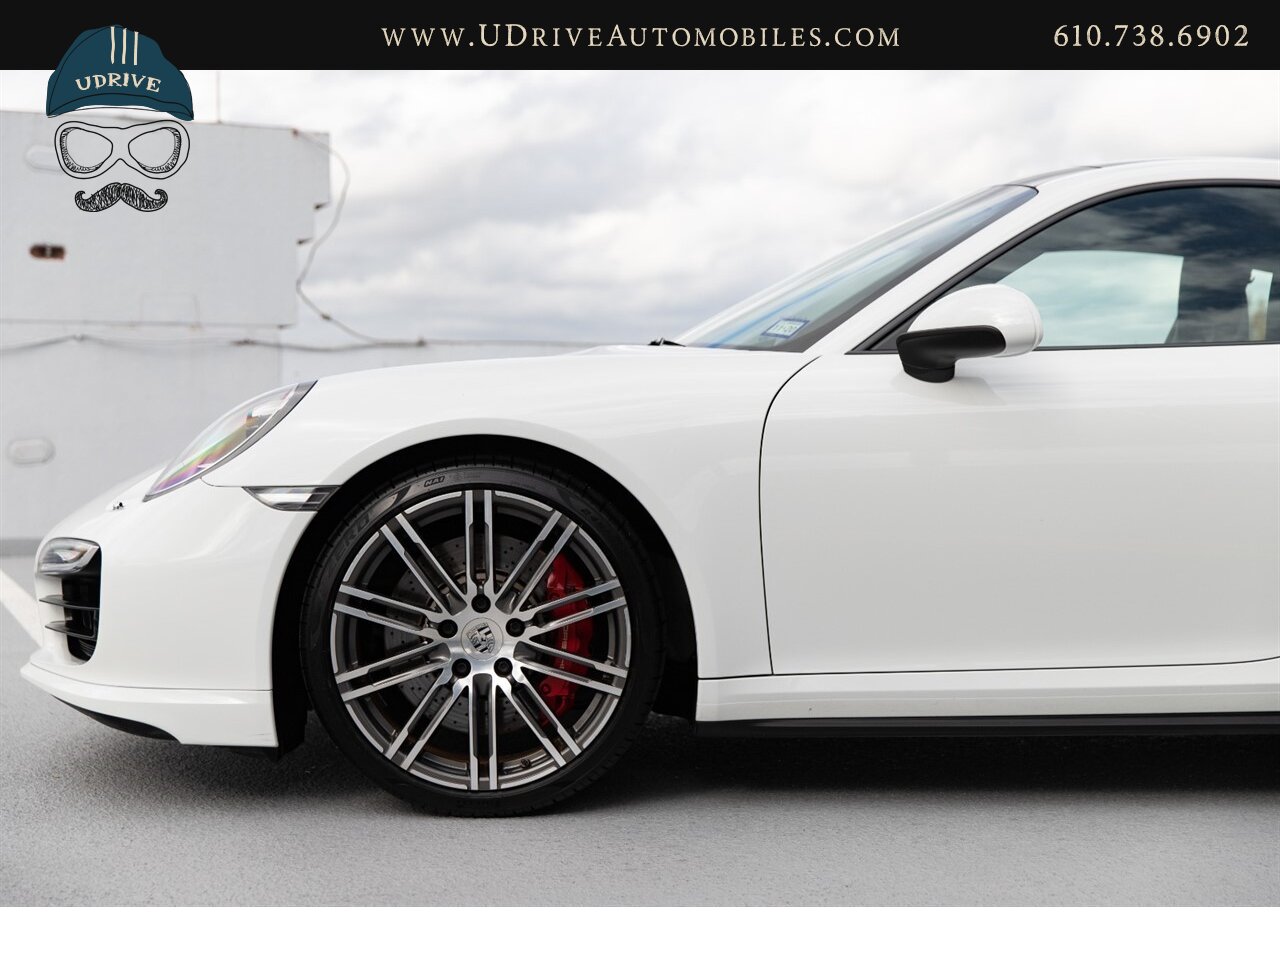 2014 Porsche 911 Turbo 12k Miles White over Black Chrono Rear Wiper  Sport Seats 20in Turbo Whls Sunroof Red Belts - Photo 8 - West Chester, PA 19382